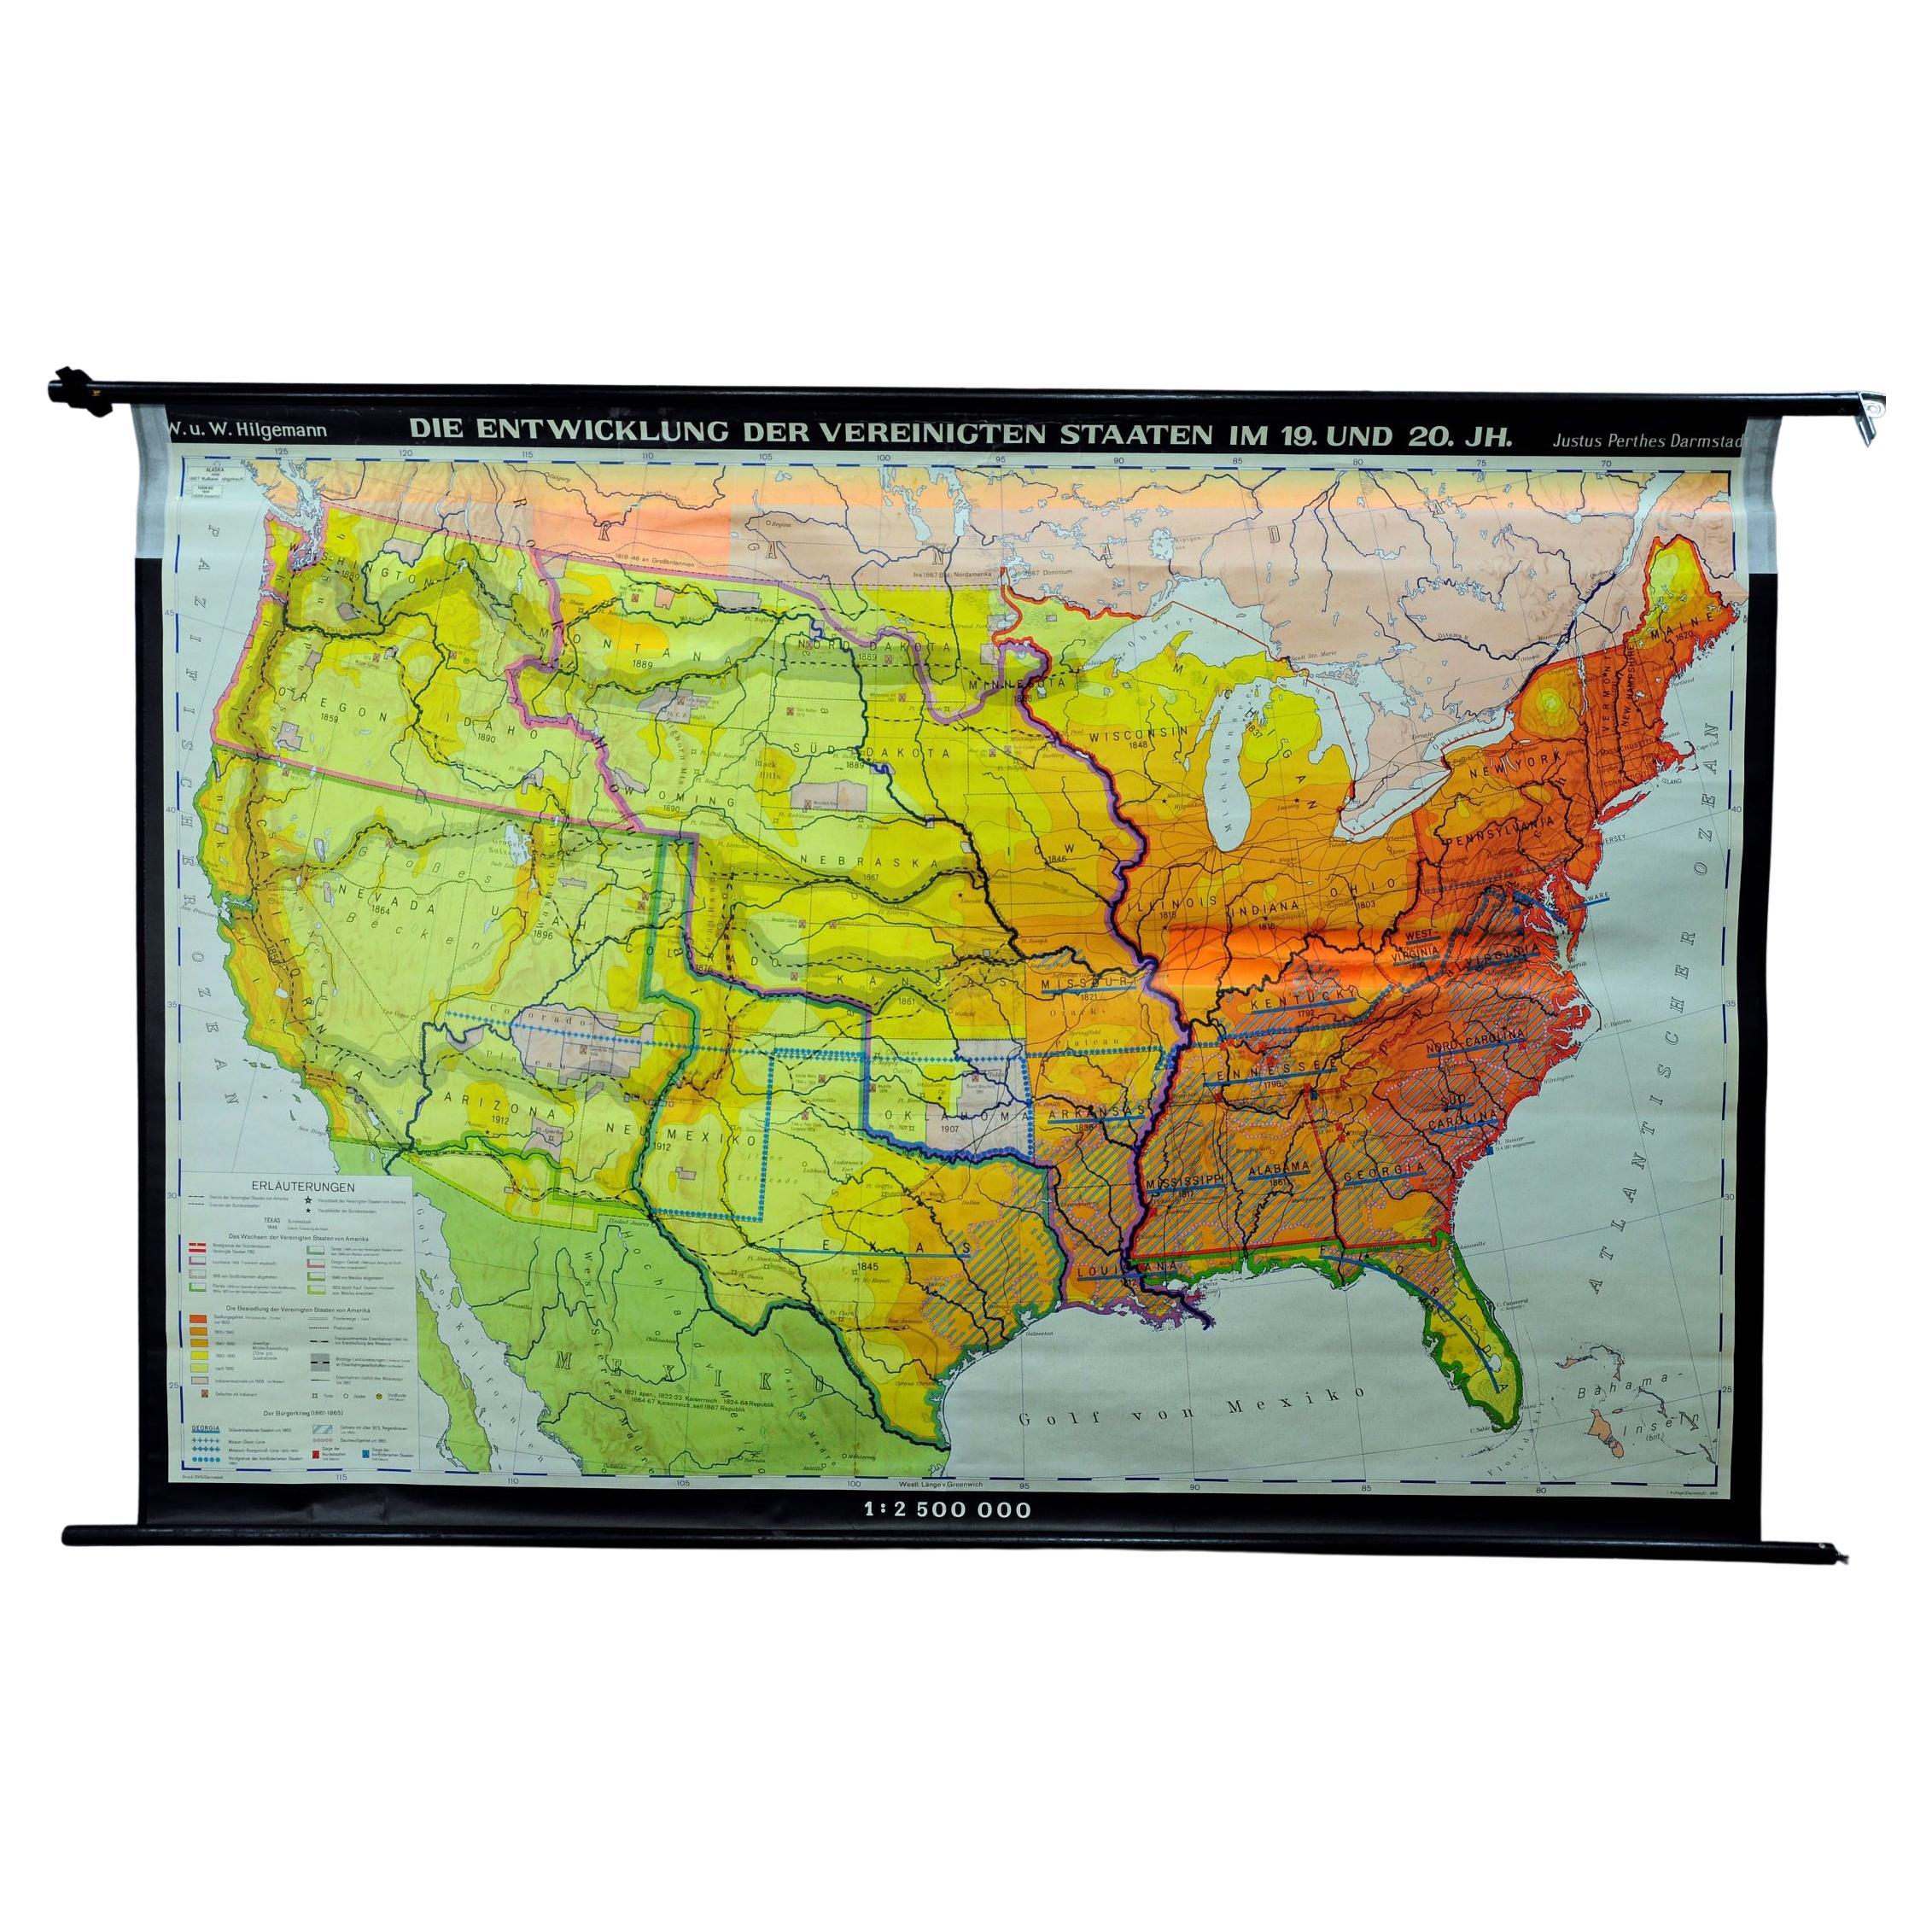 Vintage Mural Map United States Development in the 19th and 20th centuries For Sale